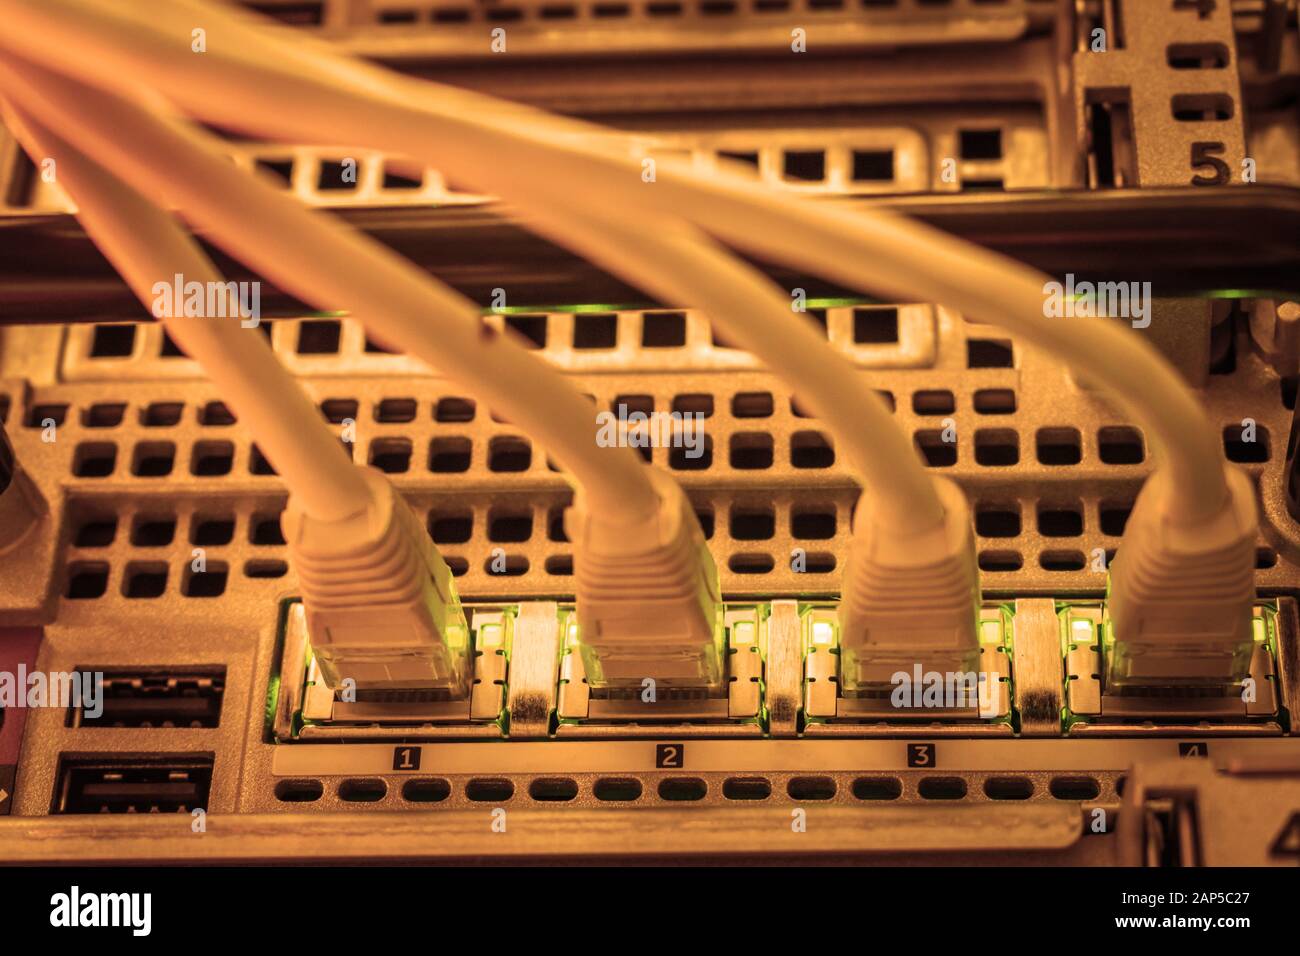 Network equipment is in the server room. Four internet twisted pair wires are connected to the router interfaces. Stock Photo